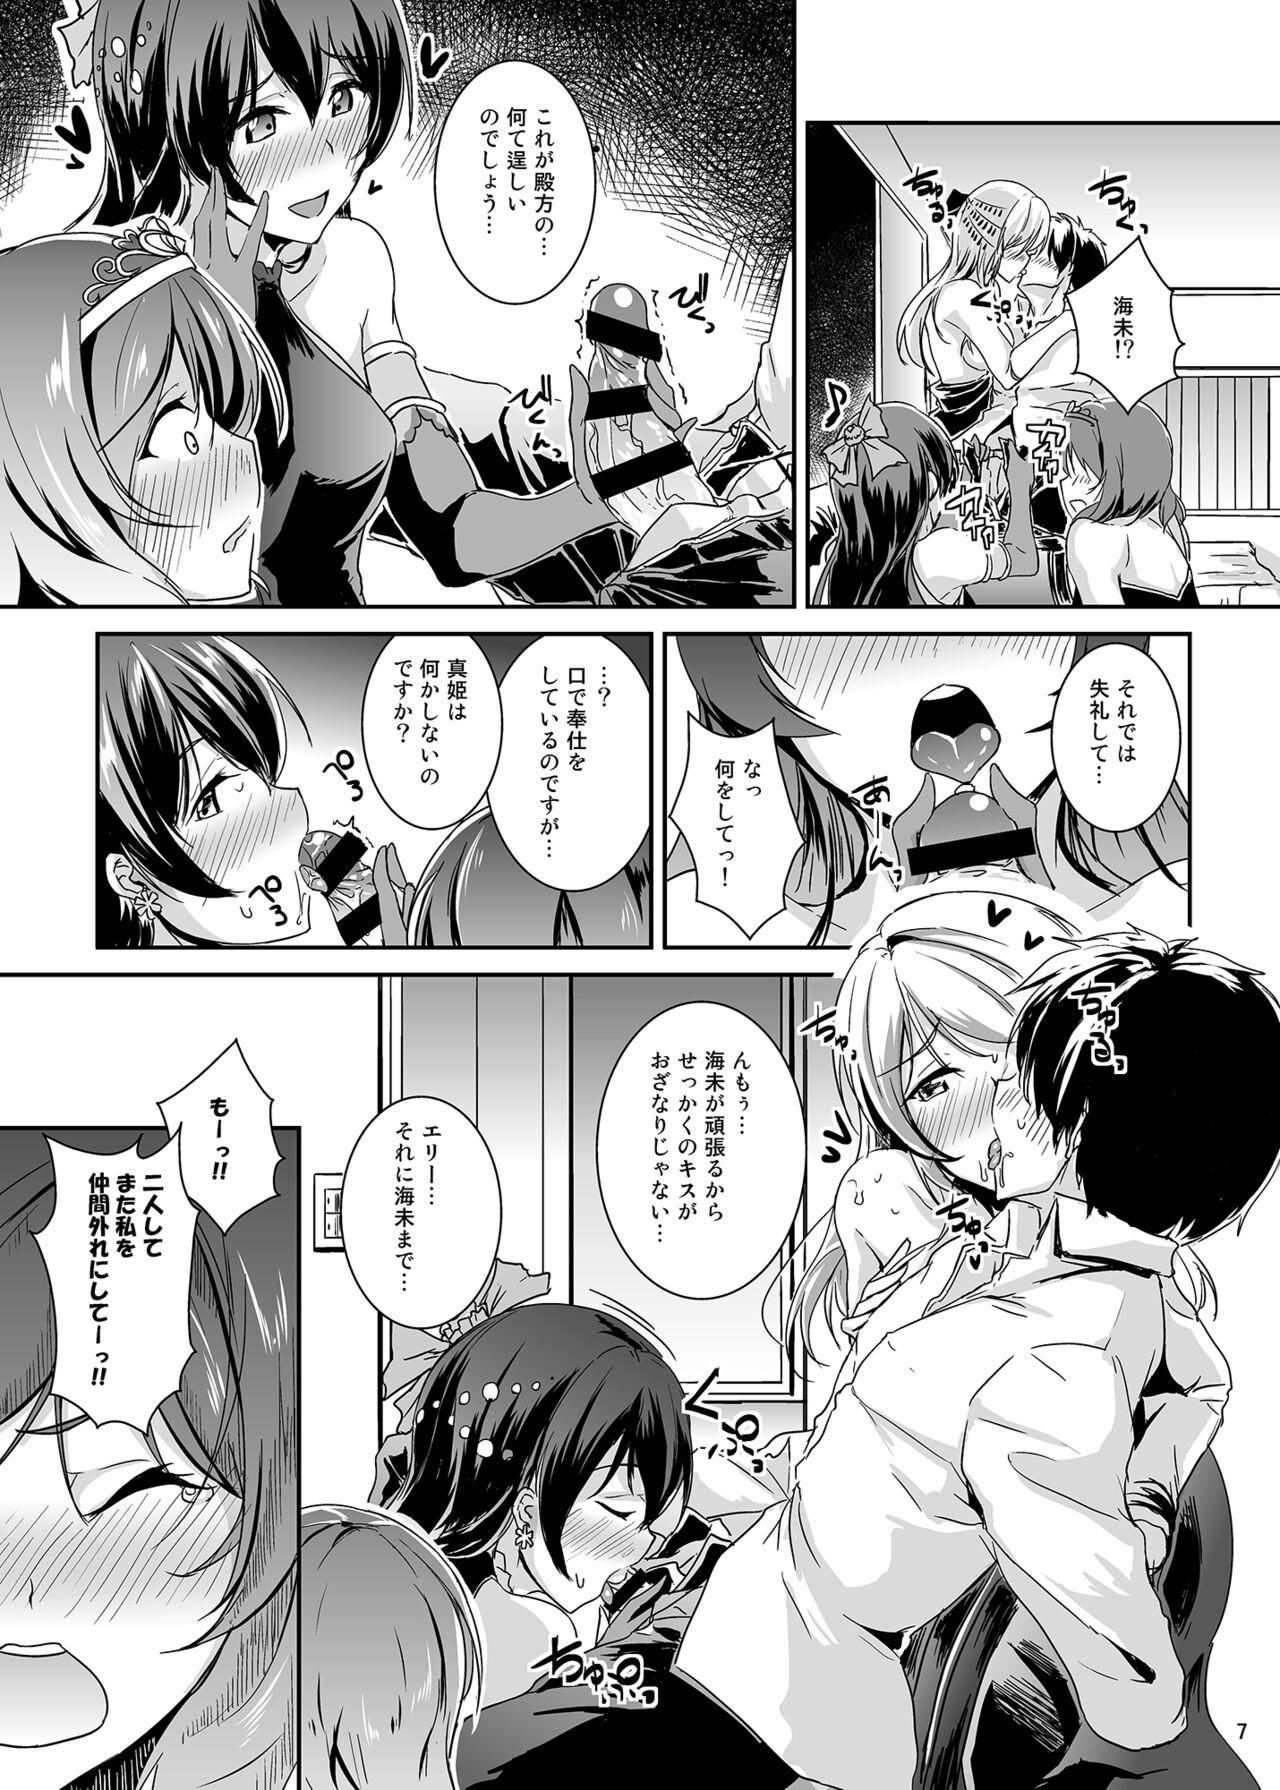 Indo secret in my heart - Love live Jap - Page 7